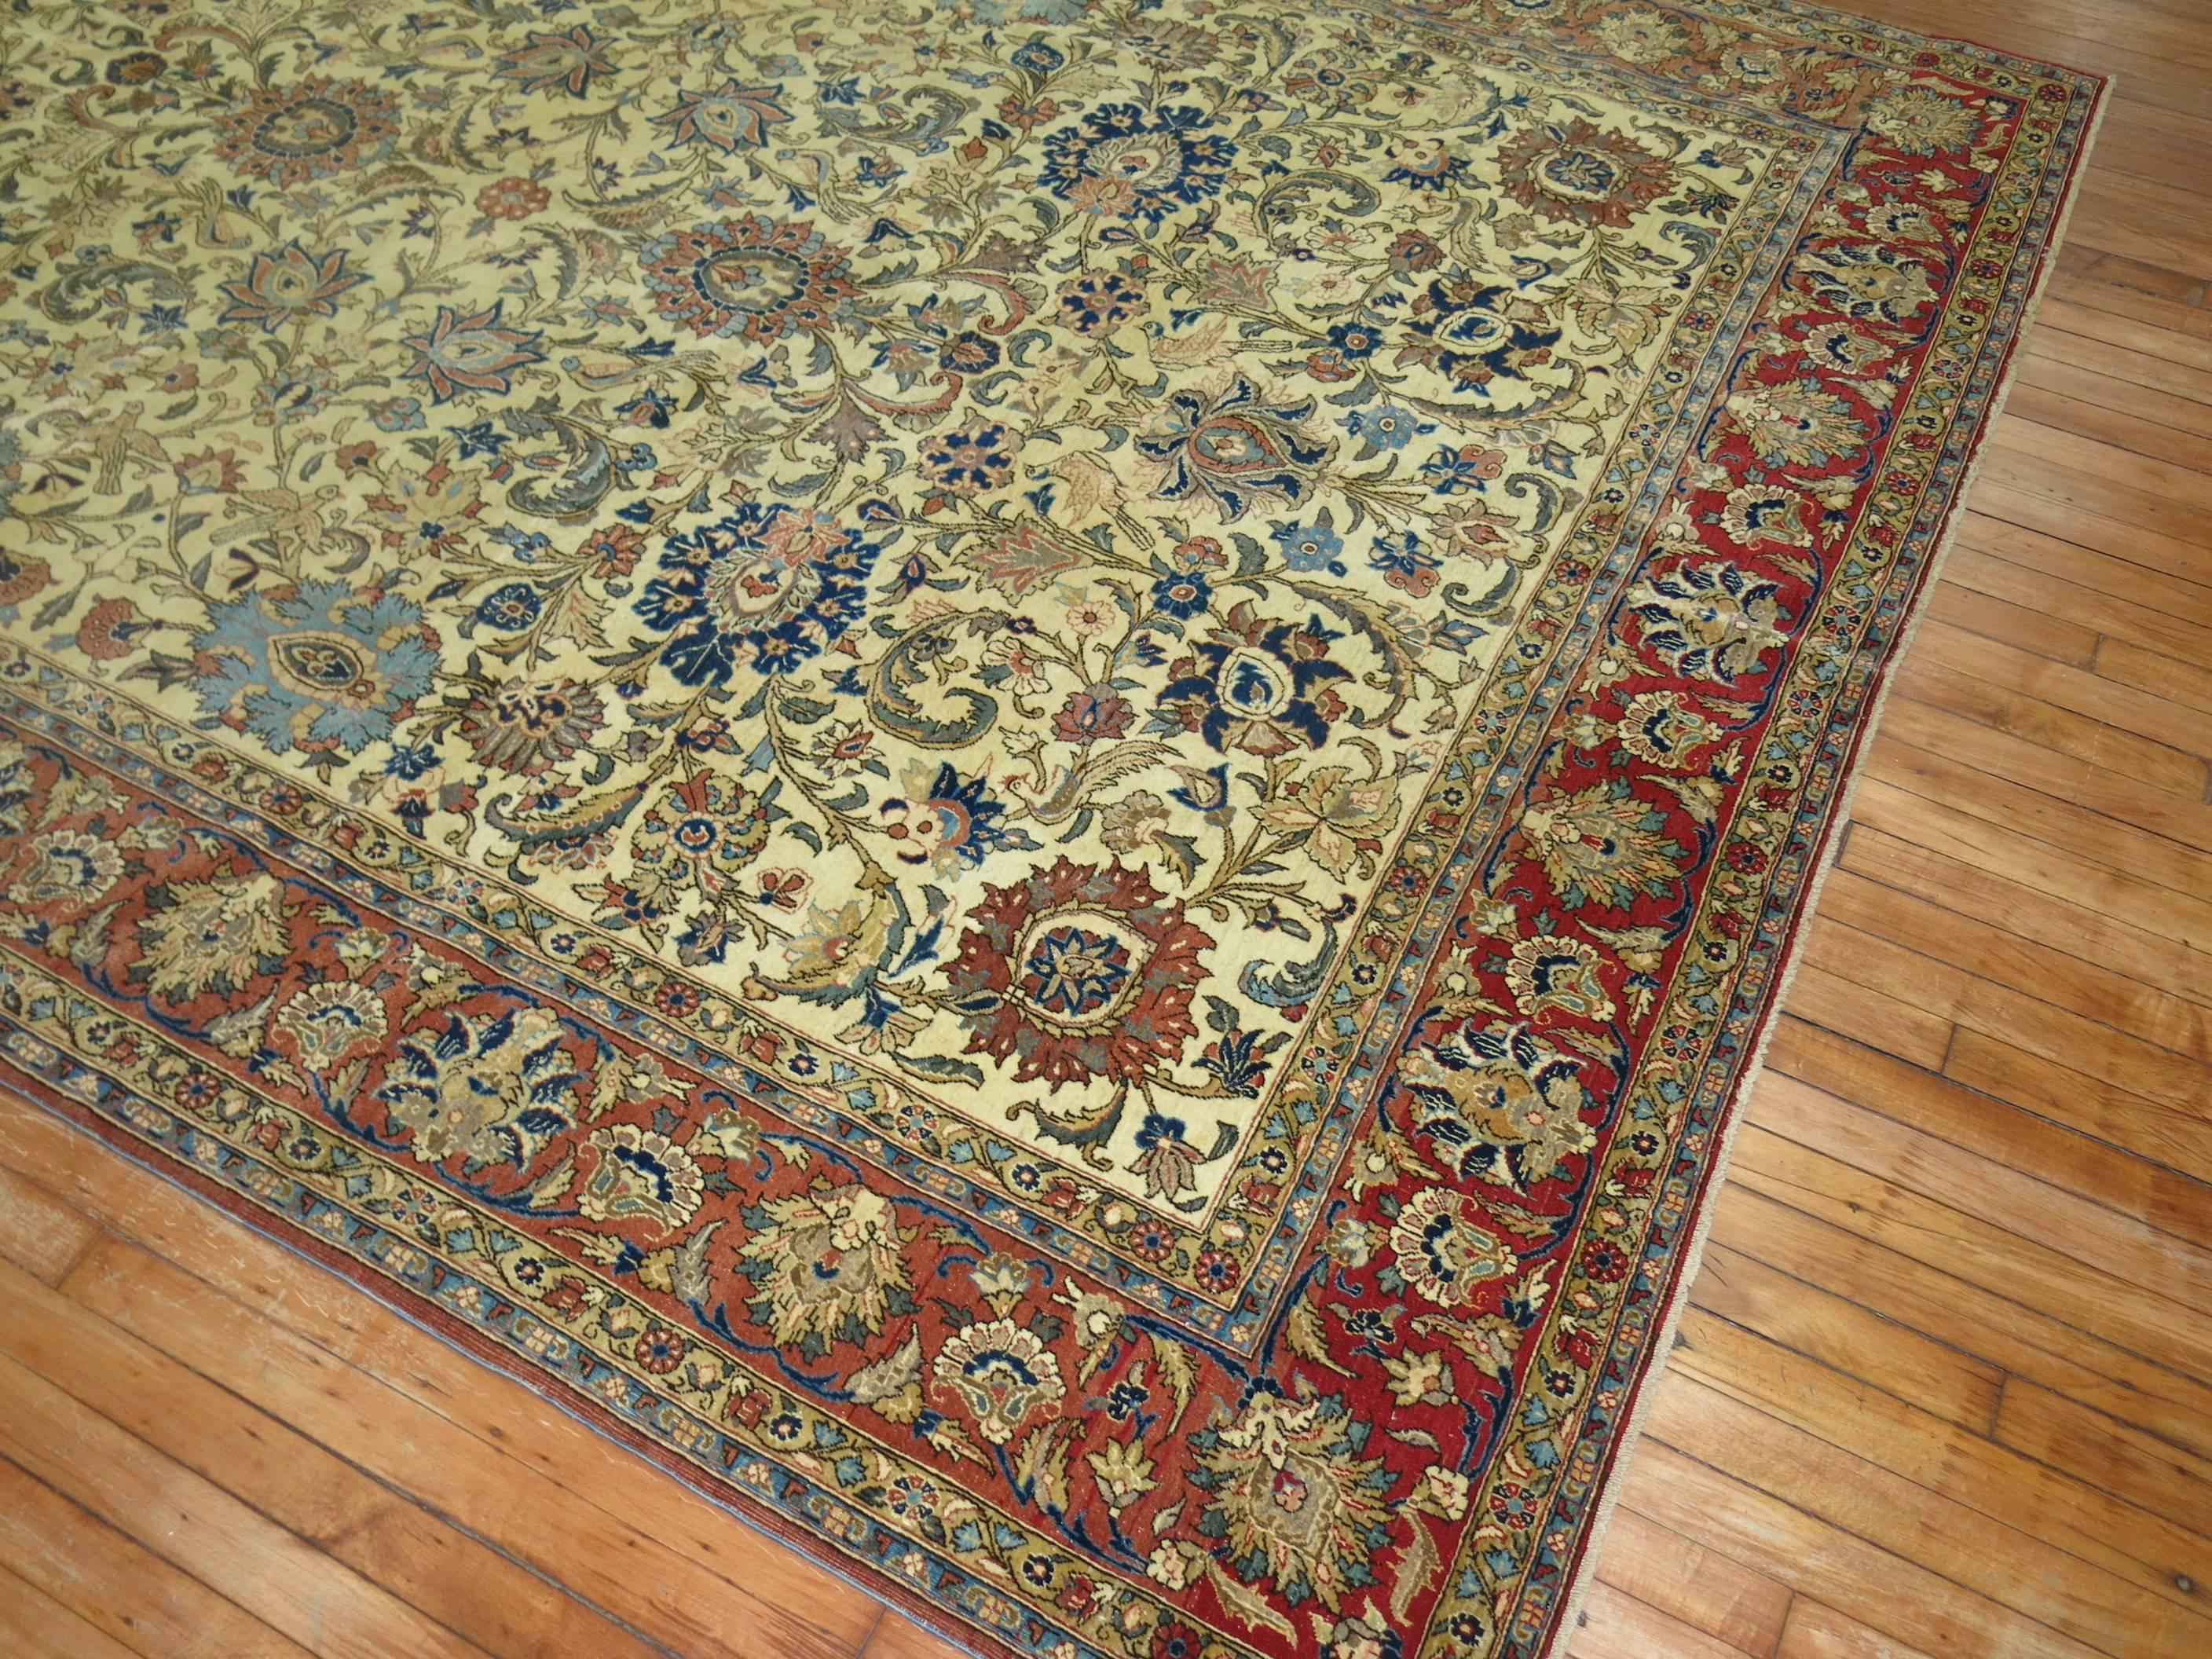 Antique Persian Qum Room Size Rug In Excellent Condition For Sale In New York, NY